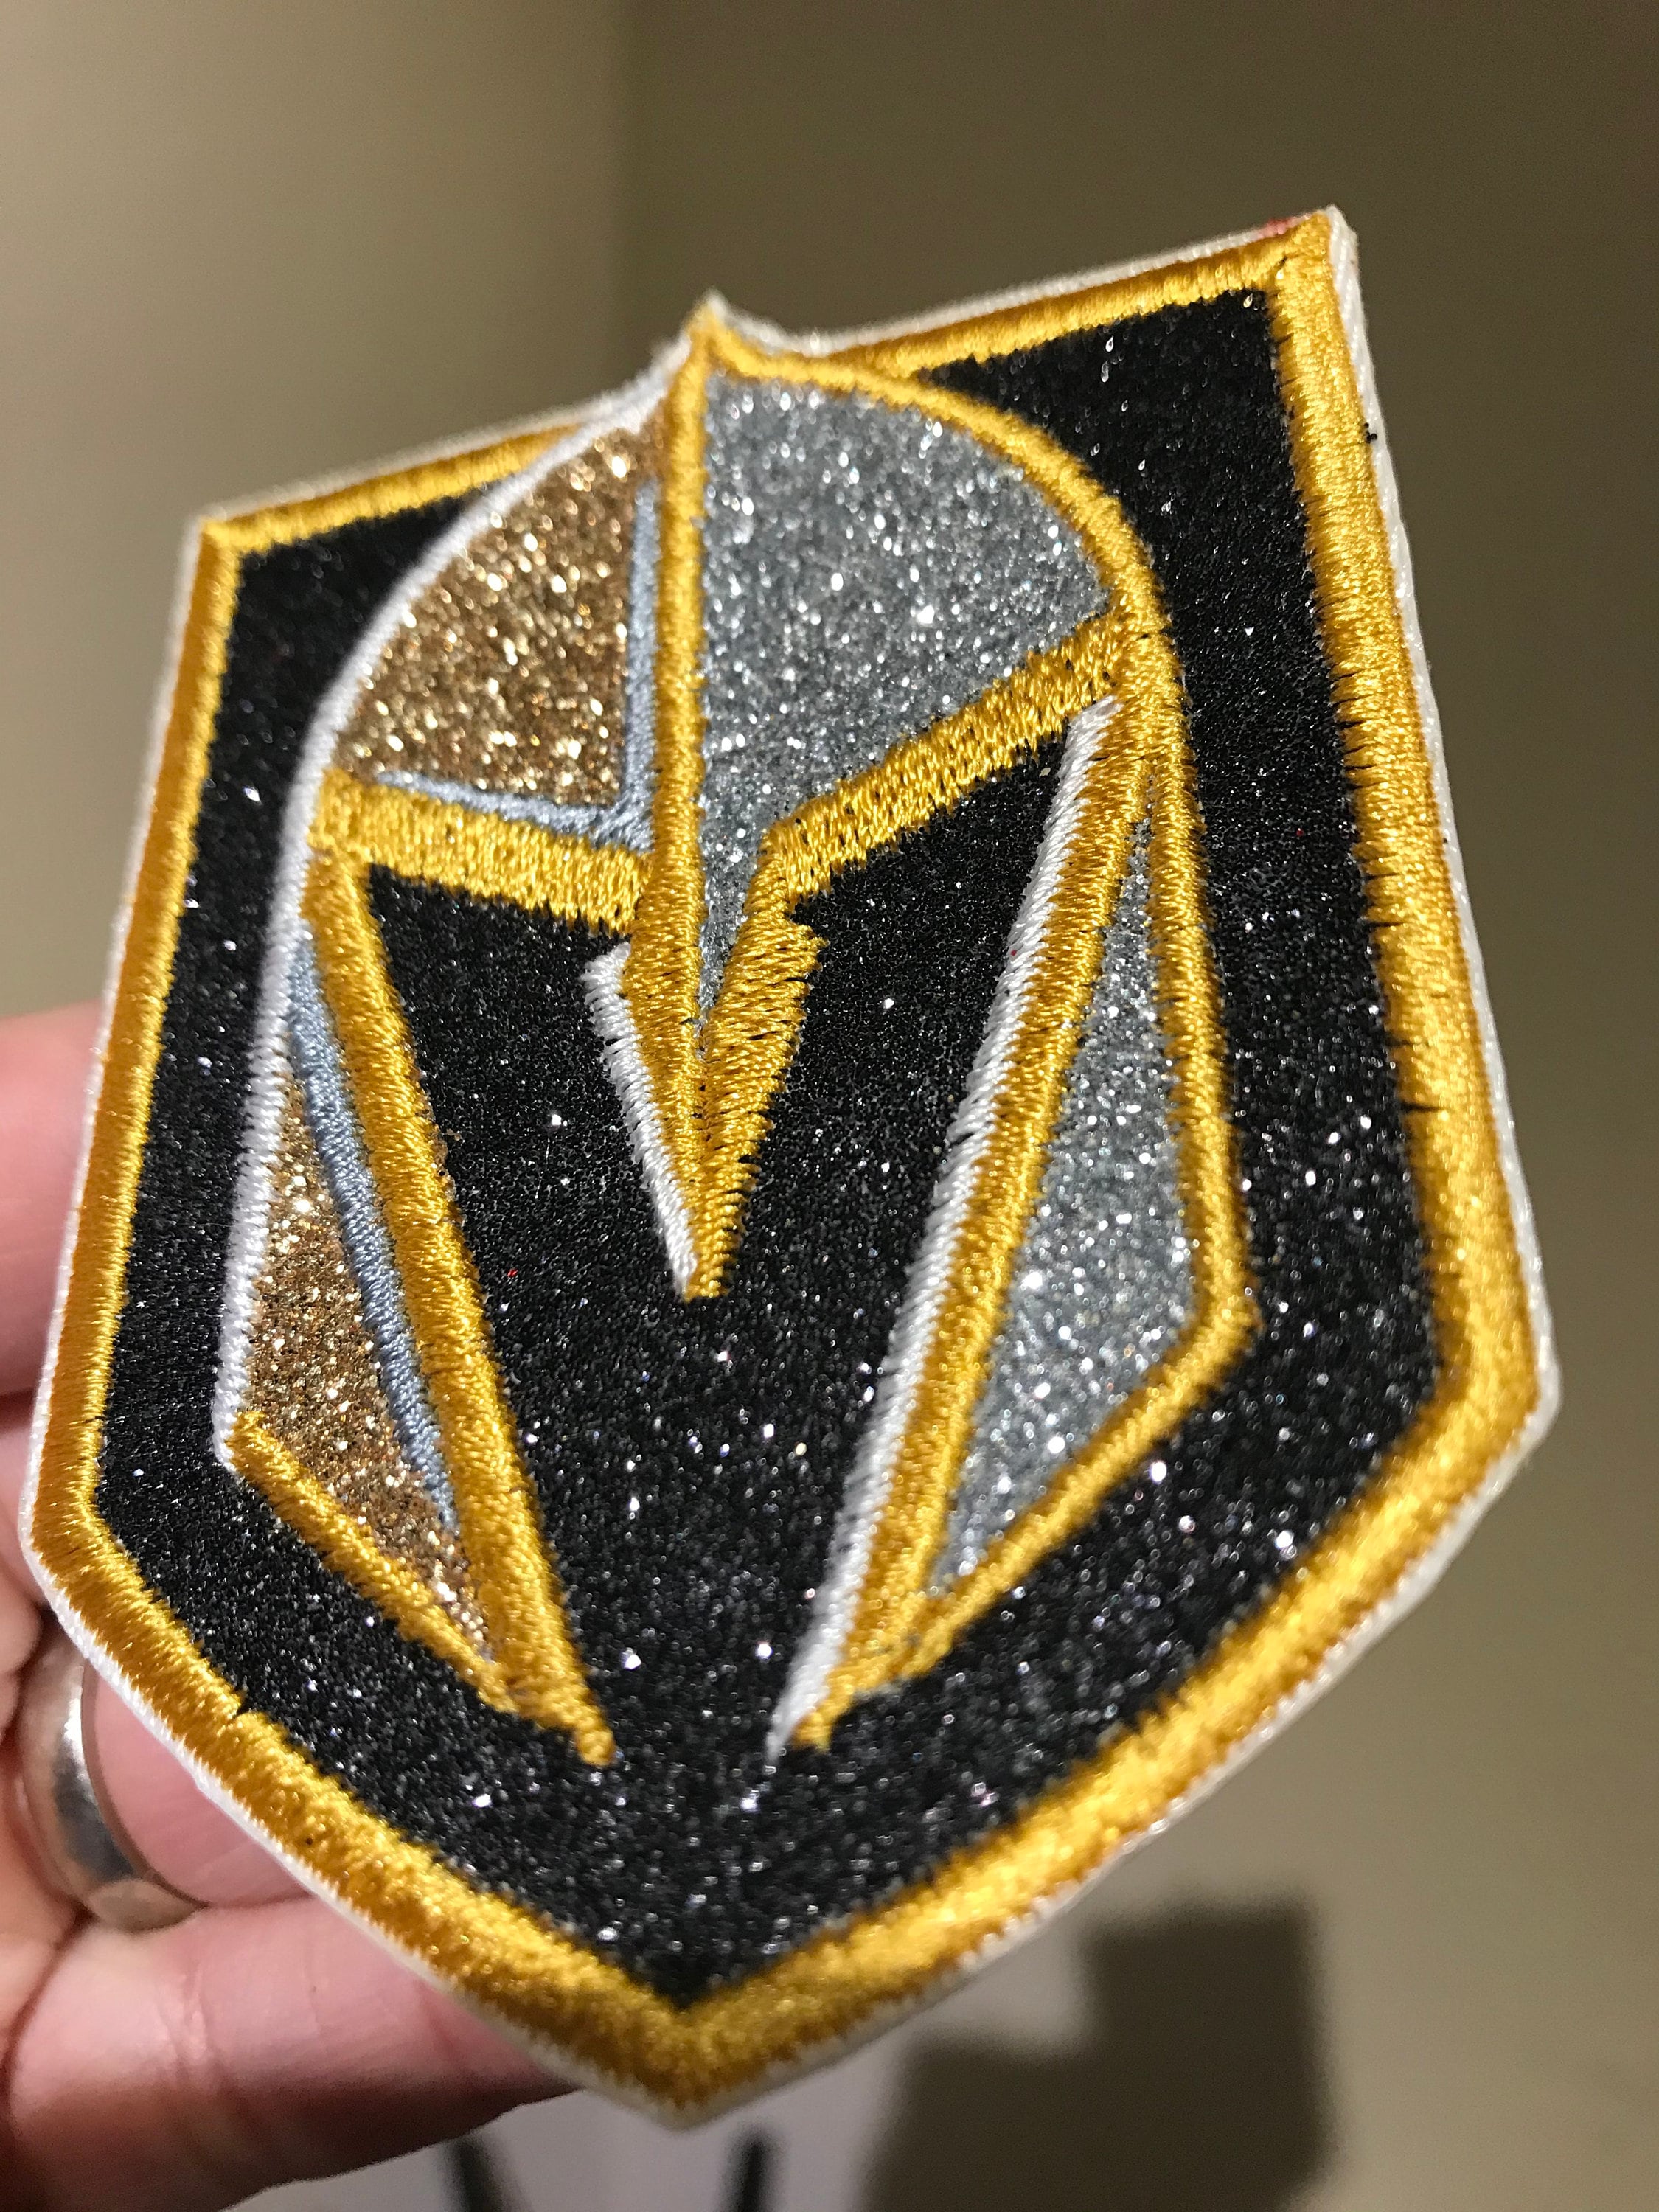  National Emblem Vegas Golden Knights Inaugural Season, Primary  Logo and Secondary Logo Patch Bundle (3 Patches) : Sports & Outdoors